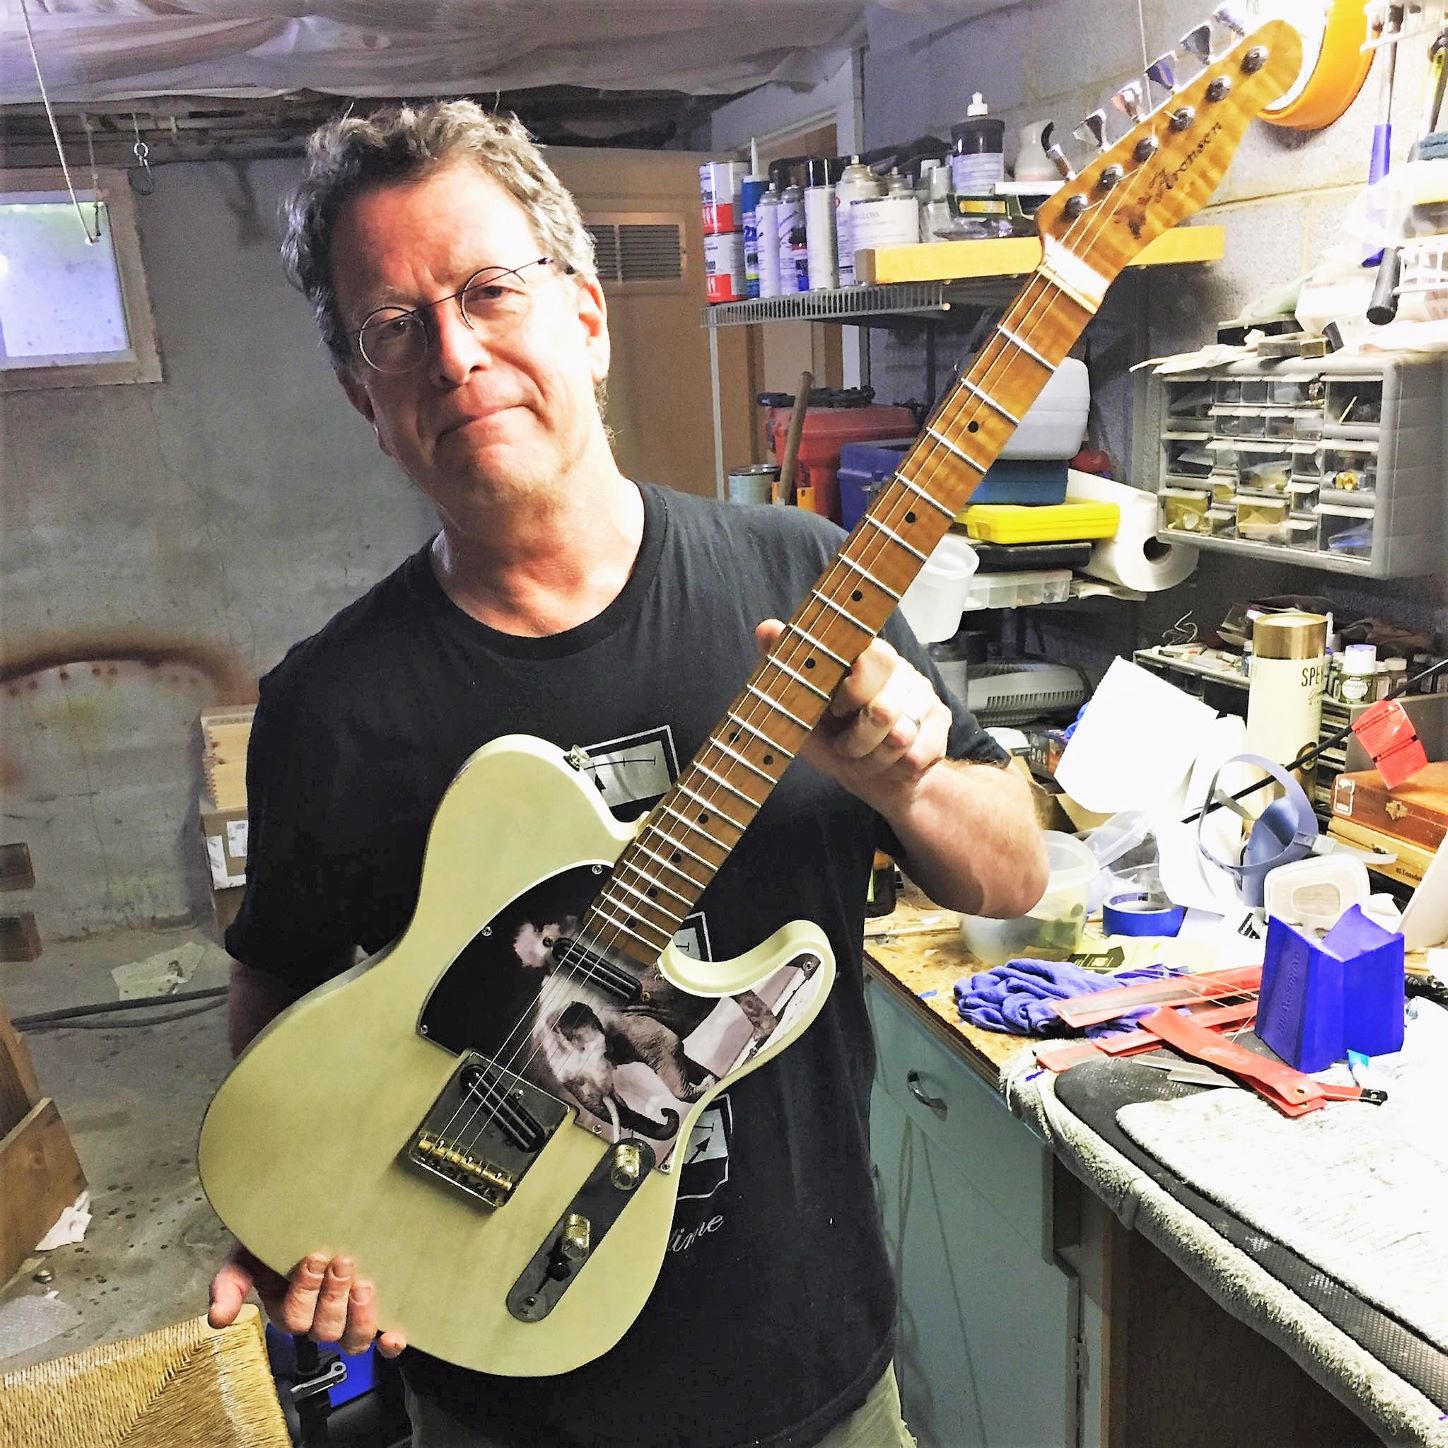 Radiologist Mike Aronson holding a custom electric guitar in his workshop